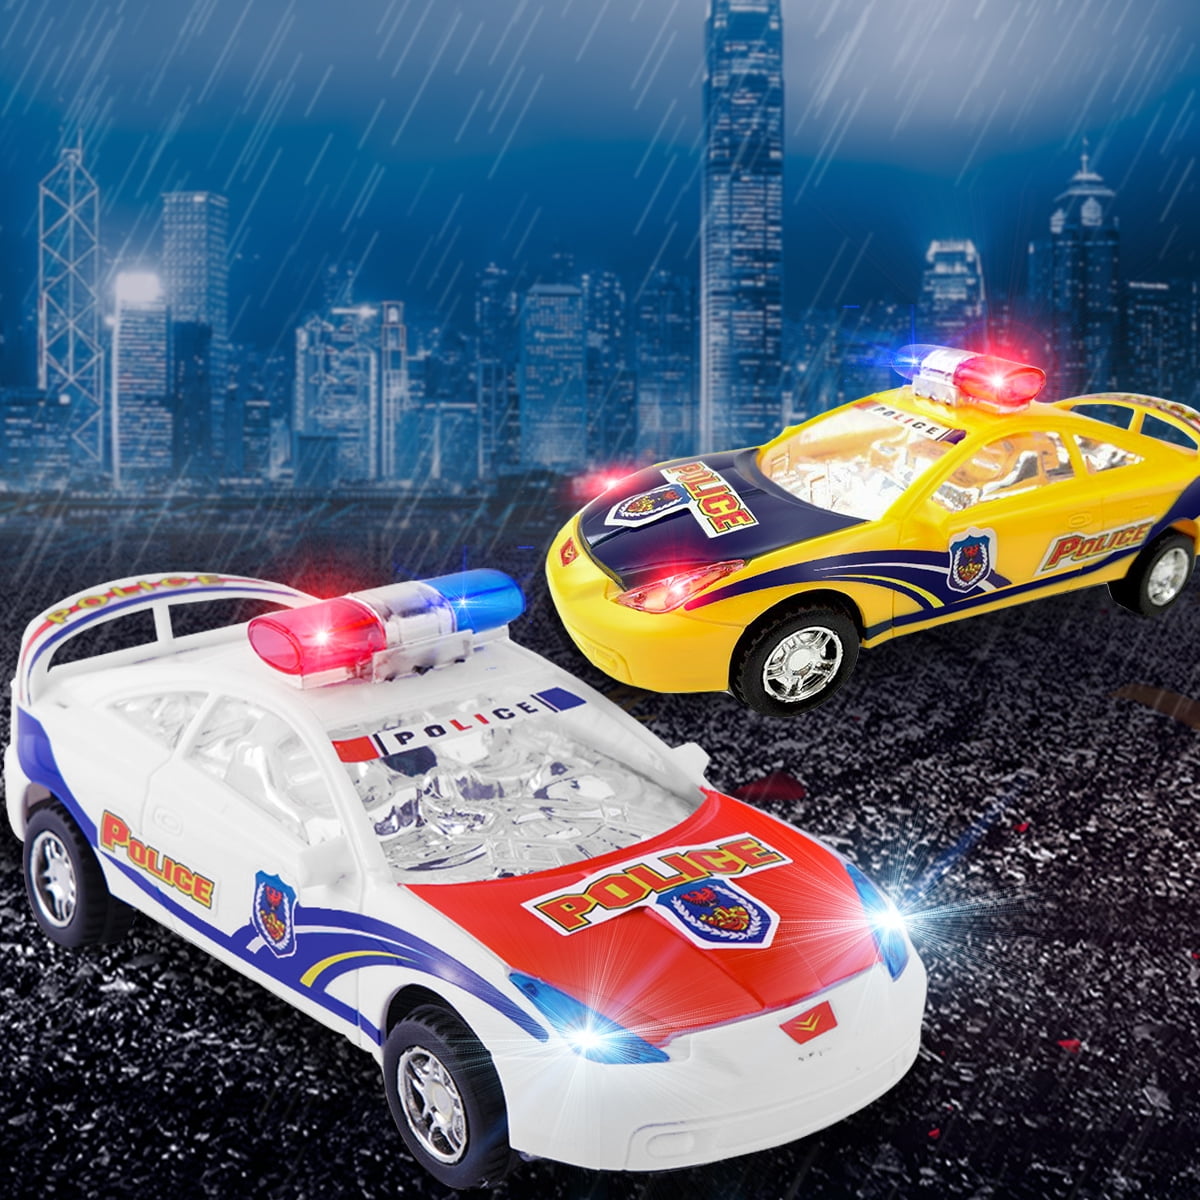 police car toy with flashing lights